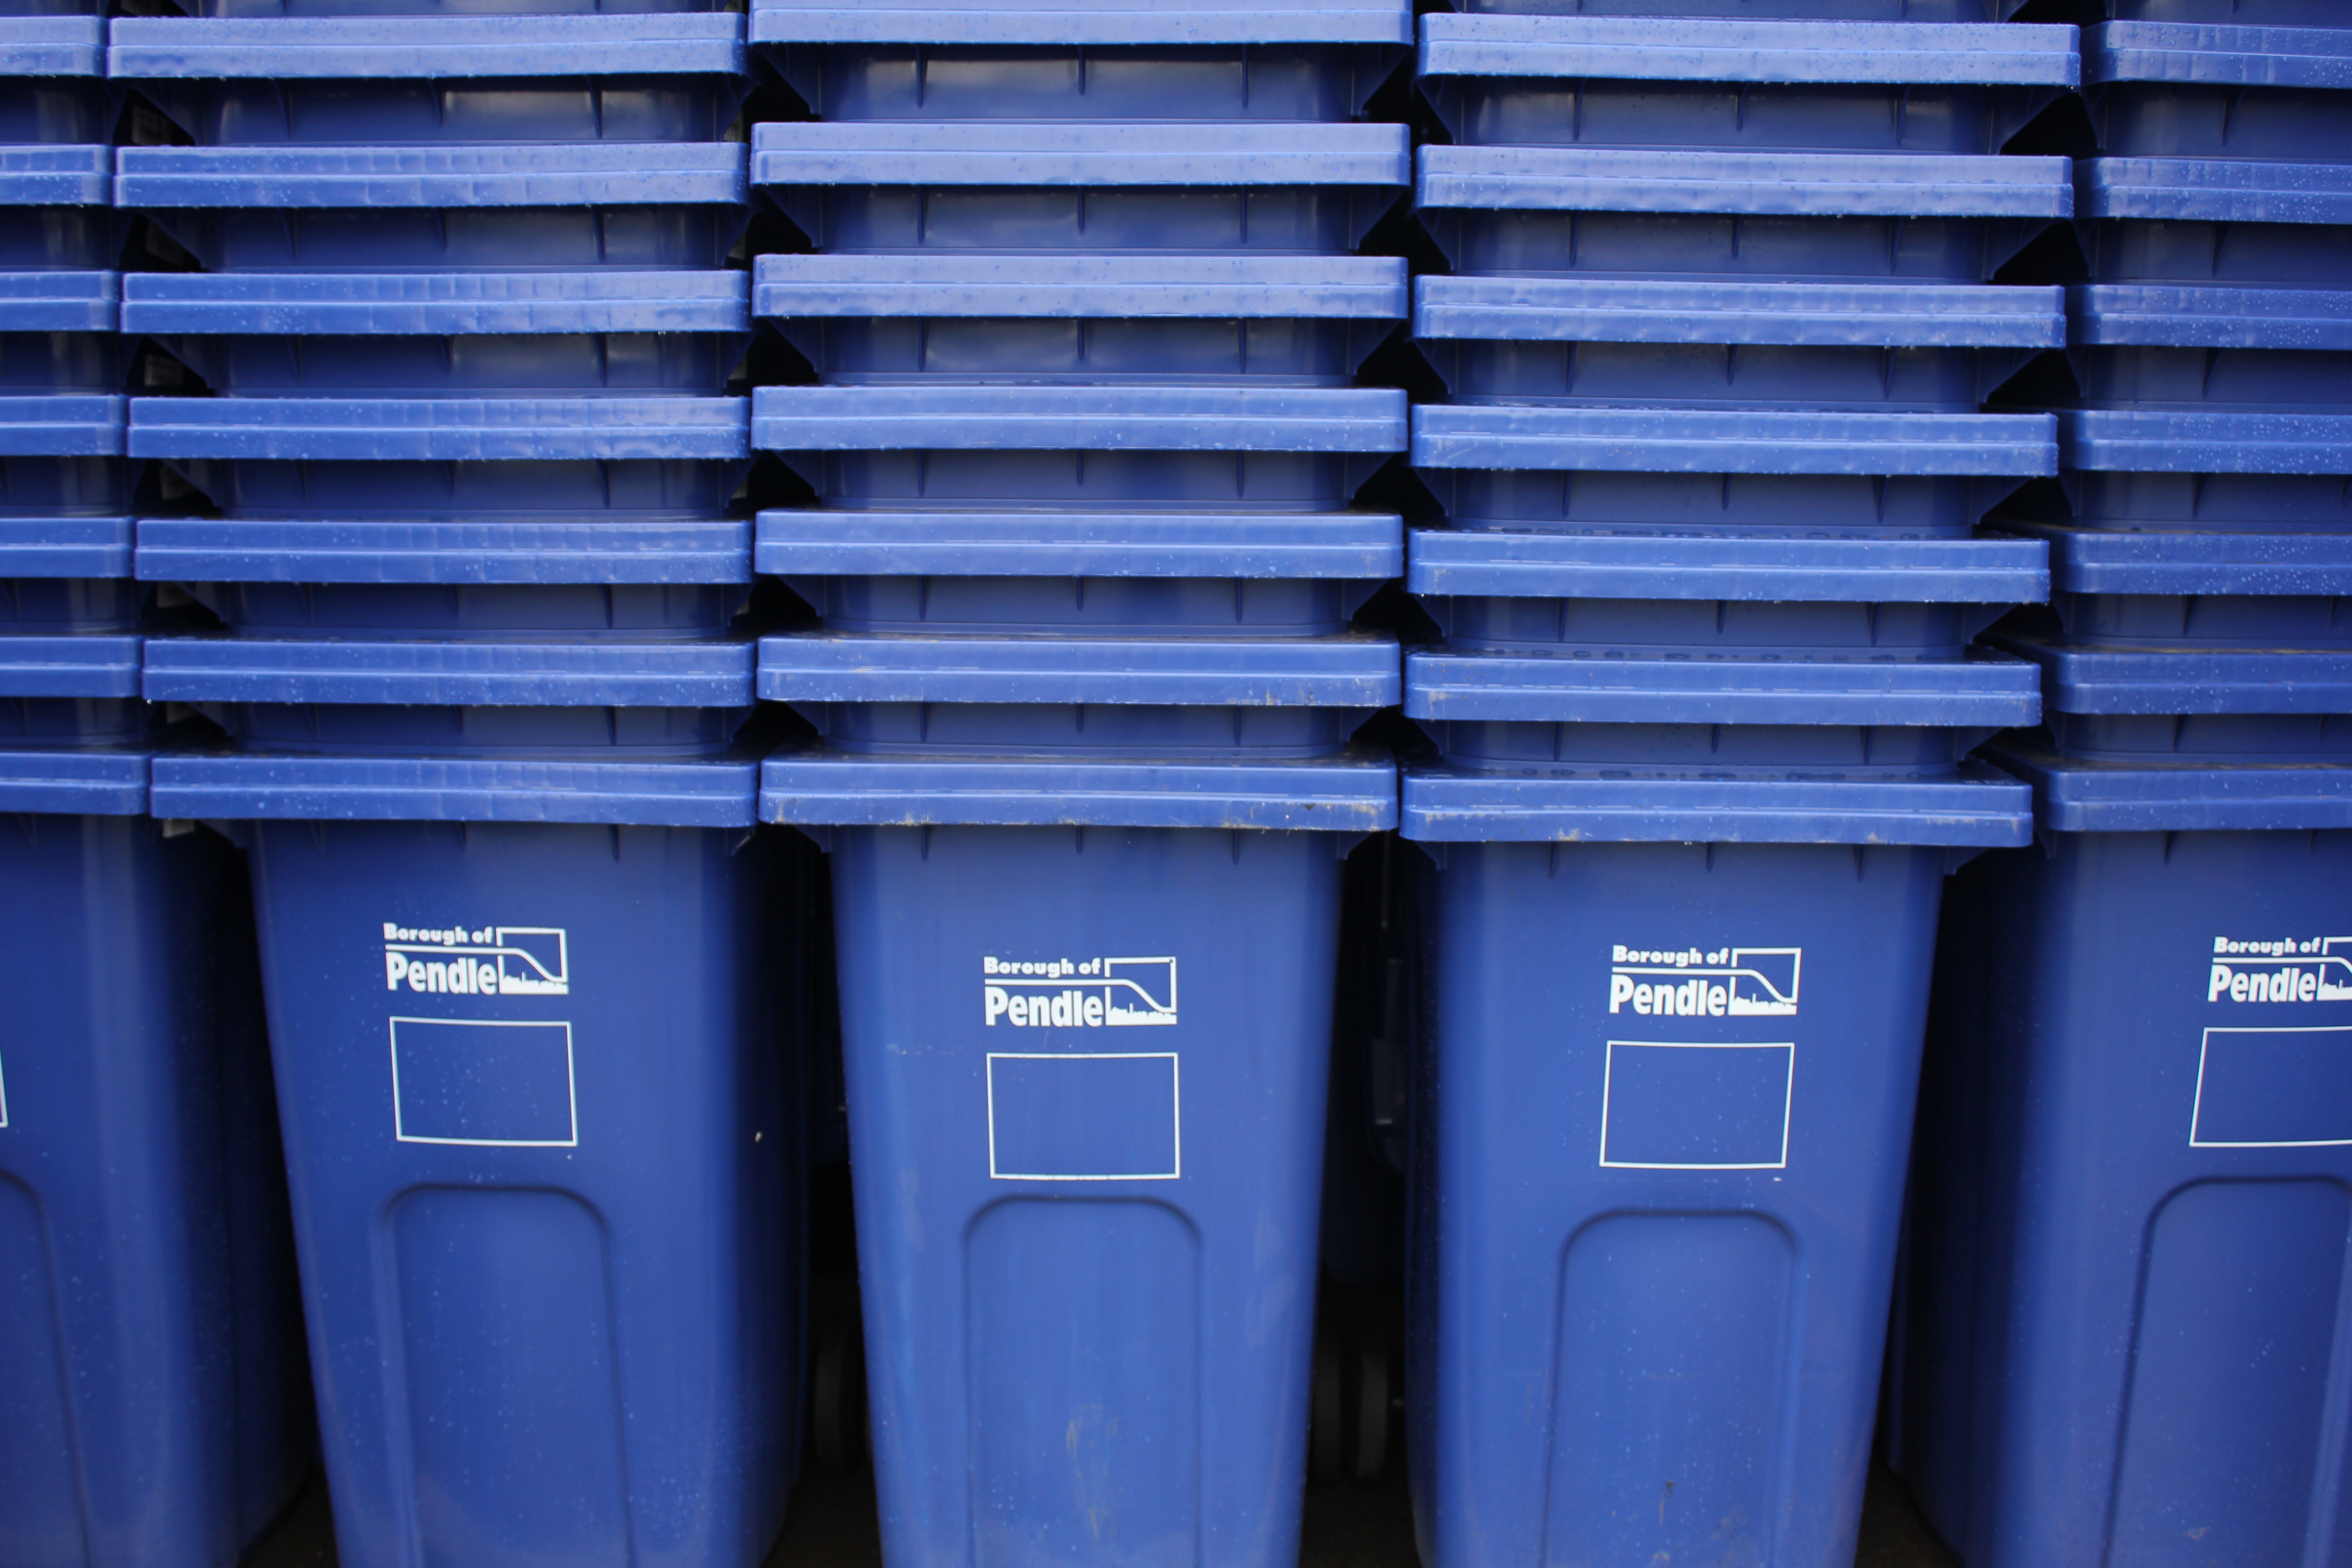 Pendle Council has ordered more blue bins to meet demand.